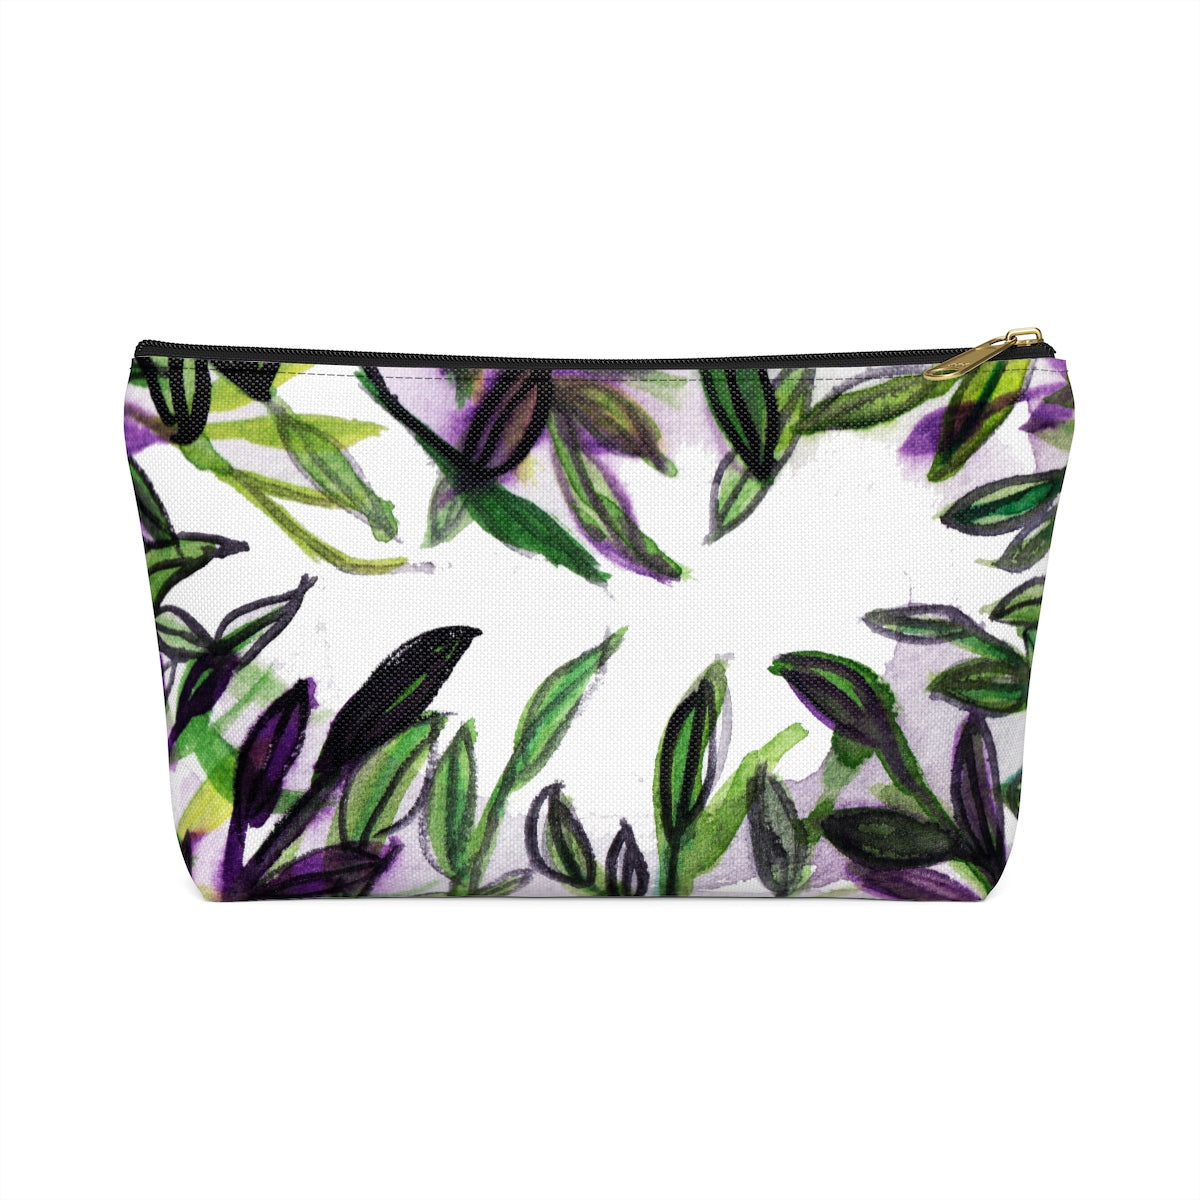 Green Foliage Print Accessory Pouch with T-bottom Makeup Bag - Made in USA-Accessory Pouch-Black-Large-Heidi Kimura Art LLC